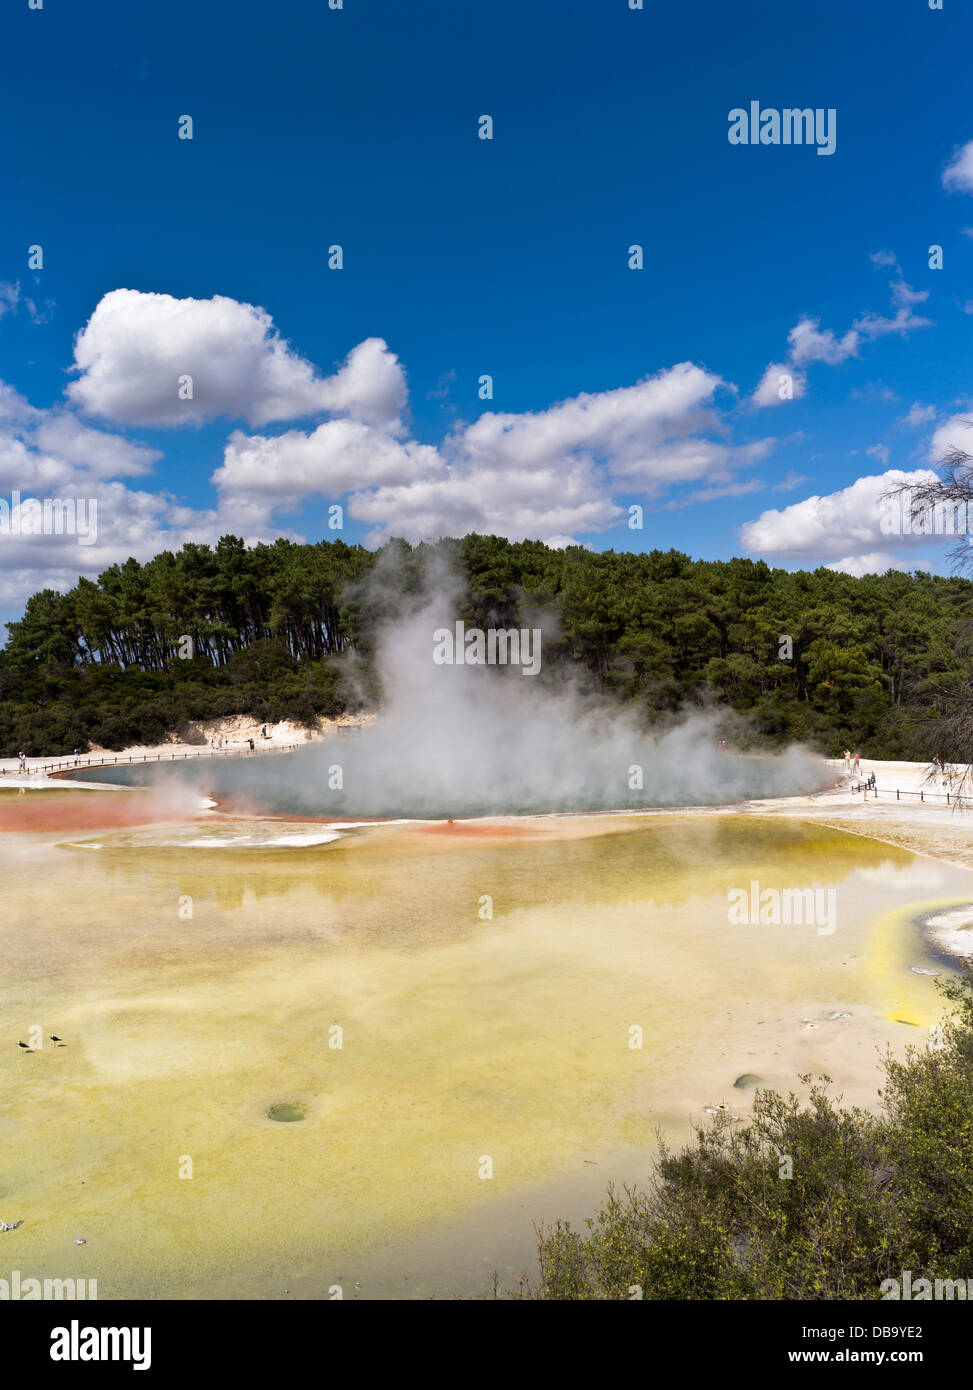 dh Wai O Tapu Thermal Wonderland WAIOTAPU ROTORUA NOUVELLE-ZÉLANDE NZ Steam Geothermal Champagne Pool Artists Palette Hot Spring jaune soufre Banque D'Images